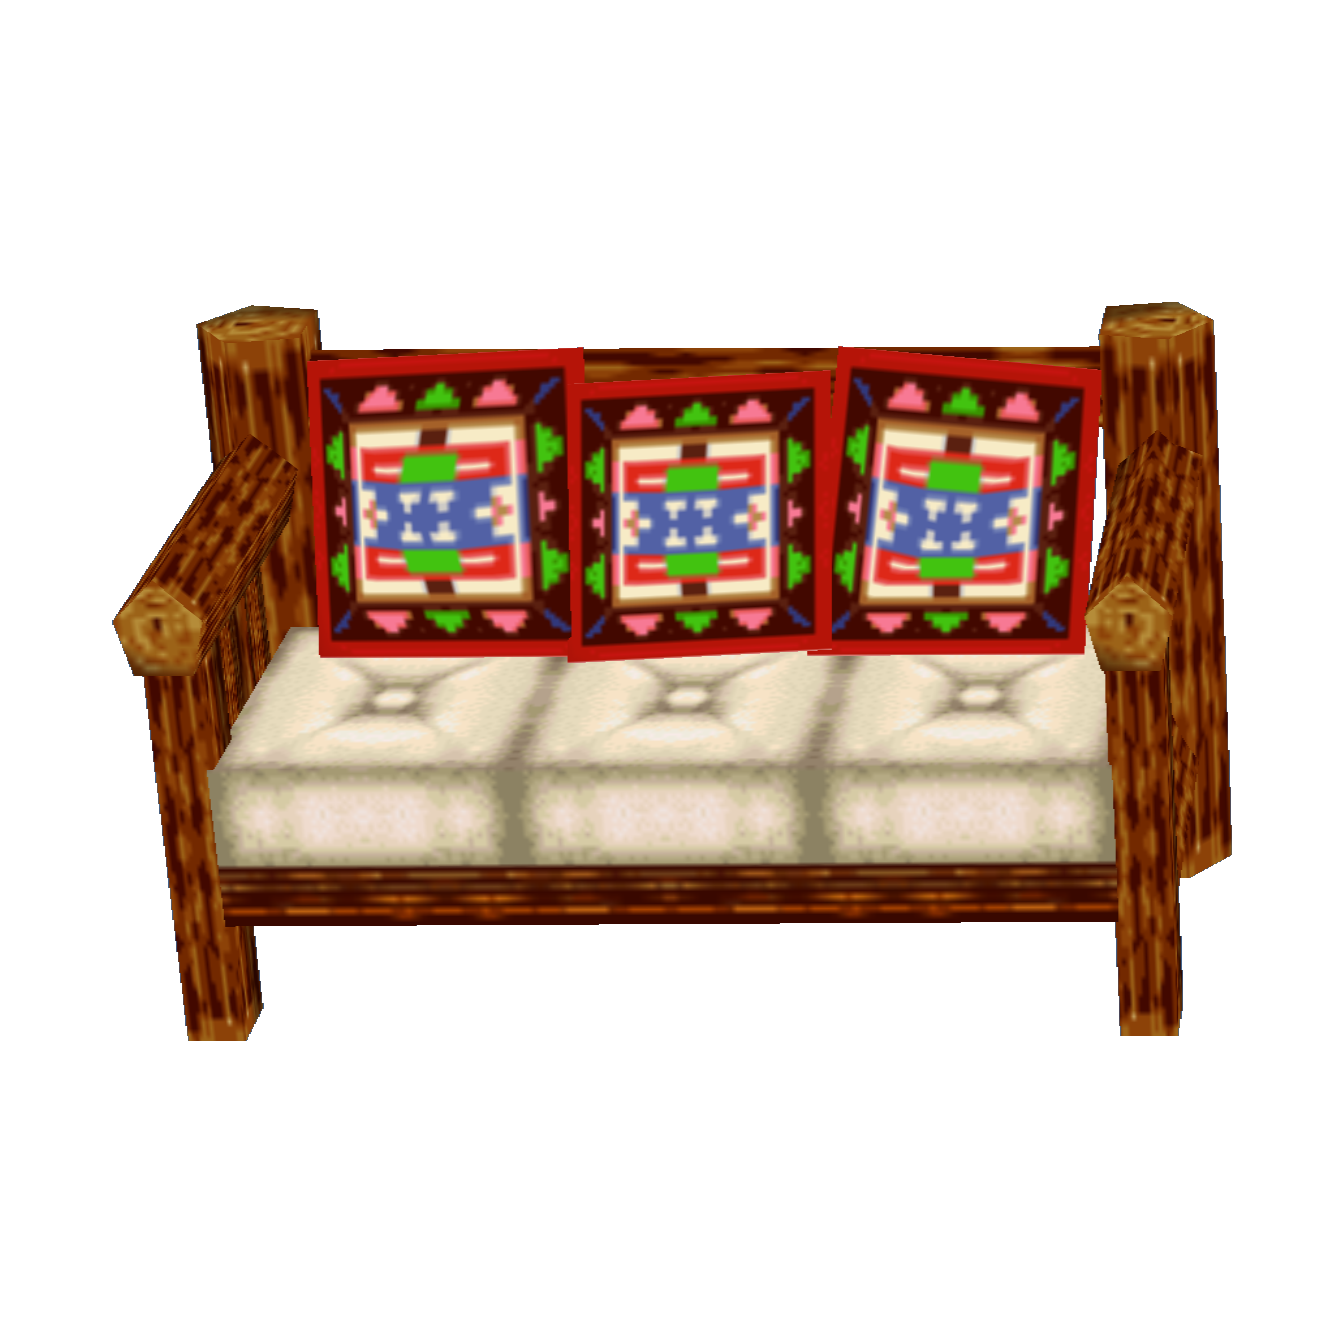 Cabin Couch CF Model.png